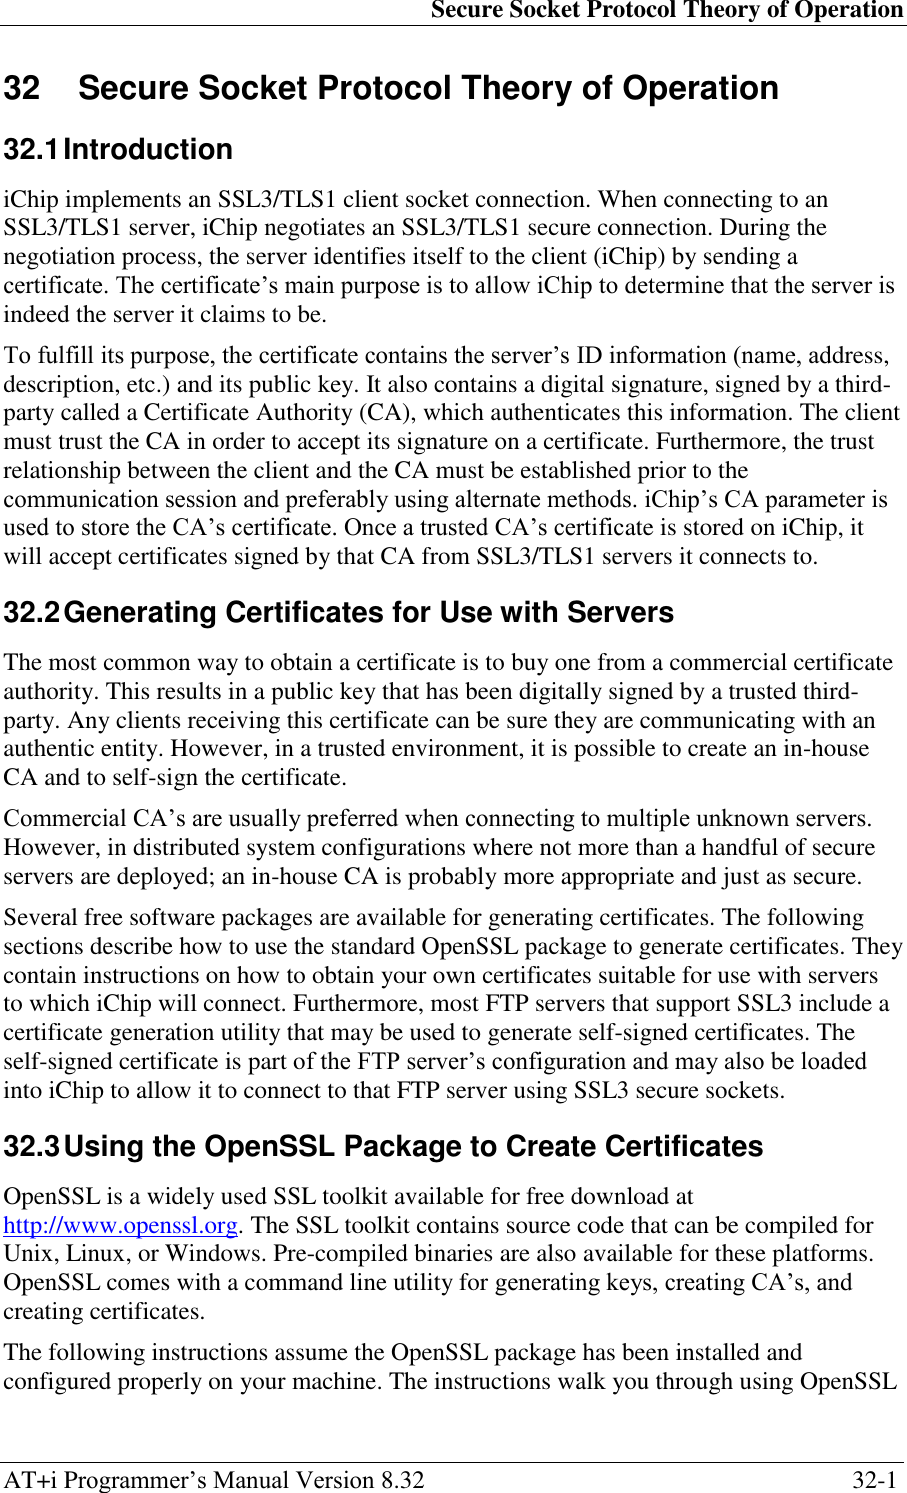 Secure Socket Protocol Theory of Operation AT+i Programmer‘s Manual Version 8.32  32-1 32  Secure Socket Protocol Theory of Operation 32.1 Introduction iChip implements an SSL3/TLS1 client socket connection. When connecting to an SSL3/TLS1 server, iChip negotiates an SSL3/TLS1 secure connection. During the negotiation process, the server identifies itself to the client (iChip) by sending a certificate. The certificate‘s main purpose is to allow iChip to determine that the server is indeed the server it claims to be. To fulfill its purpose, the certificate contains the server‘s ID information (name, address, description, etc.) and its public key. It also contains a digital signature, signed by a third-party called a Certificate Authority (CA), which authenticates this information. The client must trust the CA in order to accept its signature on a certificate. Furthermore, the trust relationship between the client and the CA must be established prior to the communication session and preferably using alternate methods. iChip‘s CA parameter is used to store the CA‘s certificate. Once a trusted CA‘s certificate is stored on iChip, it will accept certificates signed by that CA from SSL3/TLS1 servers it connects to. 32.2 Generating Certificates for Use with Servers The most common way to obtain a certificate is to buy one from a commercial certificate authority. This results in a public key that has been digitally signed by a trusted third-party. Any clients receiving this certificate can be sure they are communicating with an authentic entity. However, in a trusted environment, it is possible to create an in-house CA and to self-sign the certificate. Commercial CA‘s are usually preferred when connecting to multiple unknown servers. However, in distributed system configurations where not more than a handful of secure servers are deployed; an in-house CA is probably more appropriate and just as secure. Several free software packages are available for generating certificates. The following sections describe how to use the standard OpenSSL package to generate certificates. They contain instructions on how to obtain your own certificates suitable for use with servers to which iChip will connect. Furthermore, most FTP servers that support SSL3 include a certificate generation utility that may be used to generate self-signed certificates. The self-signed certificate is part of the FTP server‘s configuration and may also be loaded into iChip to allow it to connect to that FTP server using SSL3 secure sockets. 32.3 Using the OpenSSL Package to Create Certificates OpenSSL is a widely used SSL toolkit available for free download at http://www.openssl.org. The SSL toolkit contains source code that can be compiled for Unix, Linux, or Windows. Pre-compiled binaries are also available for these platforms. OpenSSL comes with a command line utility for generating keys, creating CA‘s, and creating certificates. The following instructions assume the OpenSSL package has been installed and configured properly on your machine. The instructions walk you through using OpenSSL 